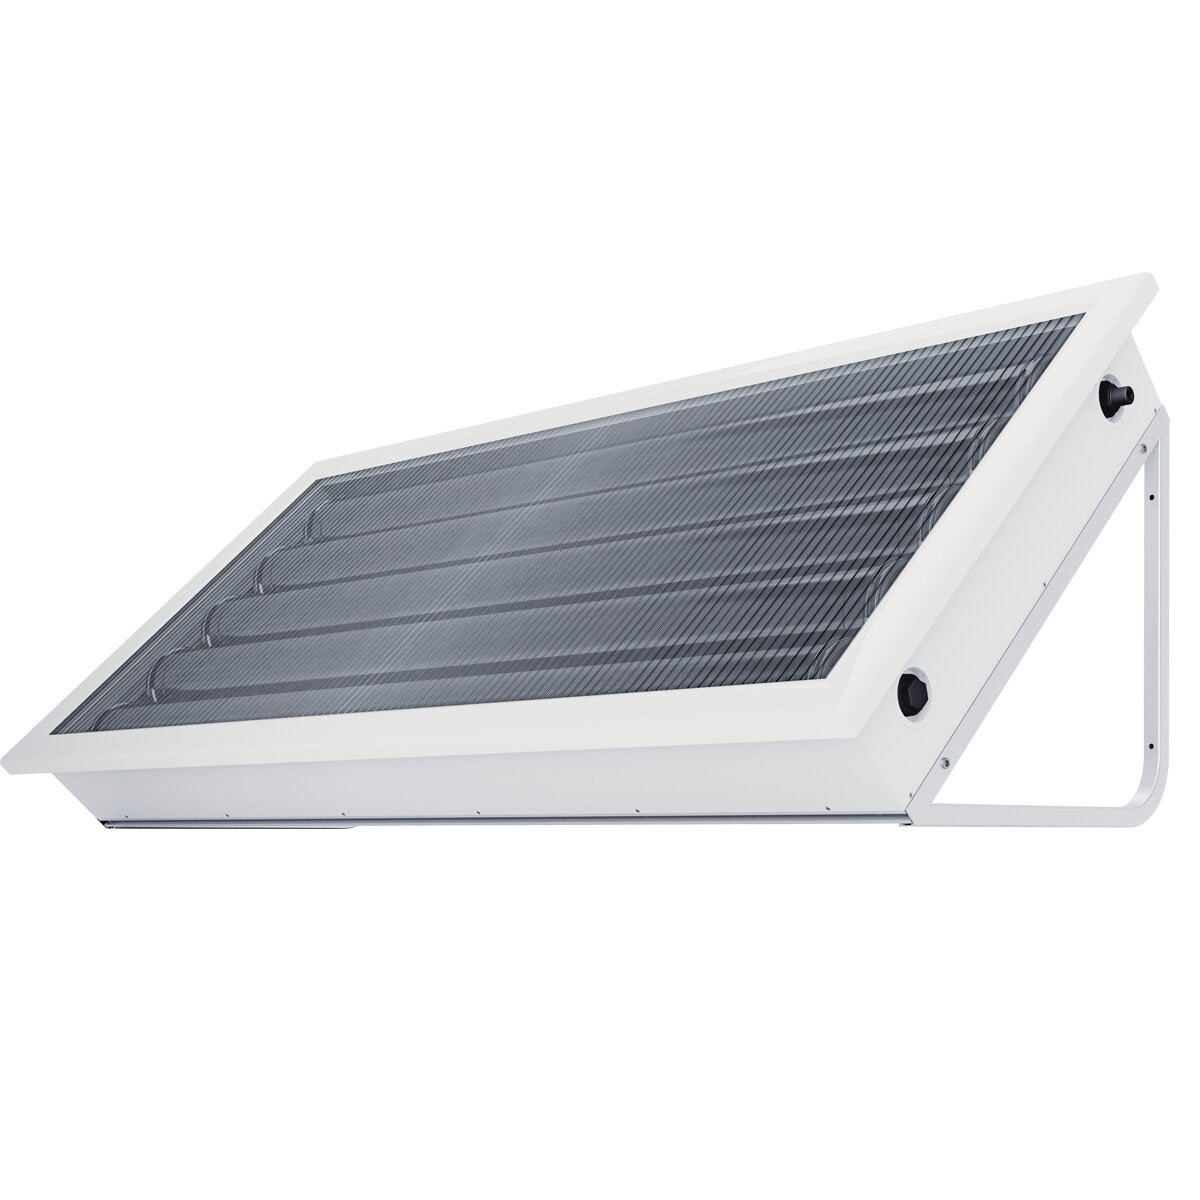 Pleion Ego 260 solar panel natural circulation white 245 liters flat and sloping roof